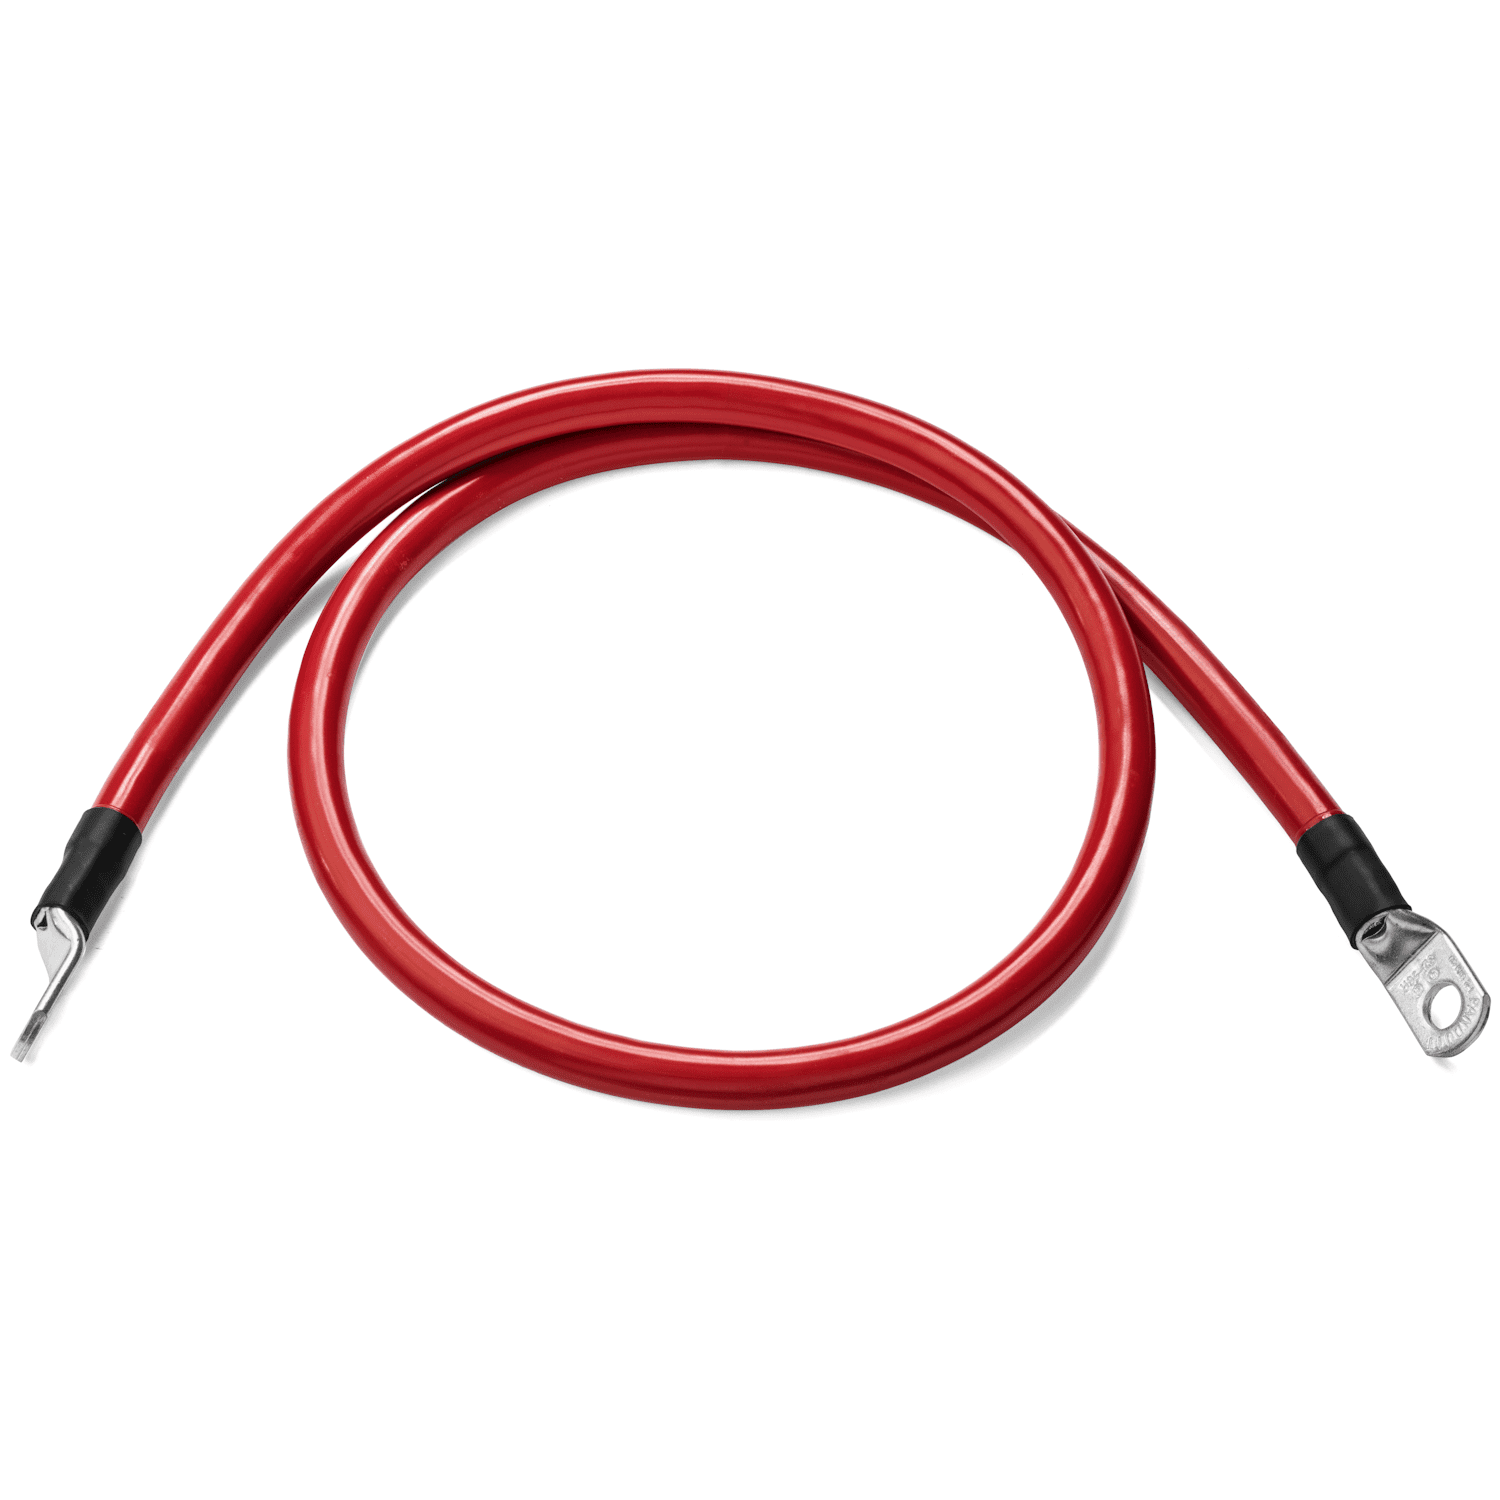 5 FT 5/16 Ring Terminals 0000 Gauge Positive Only Red 5 Foot 4/0 AWG Battery Cable by Spartan Power 